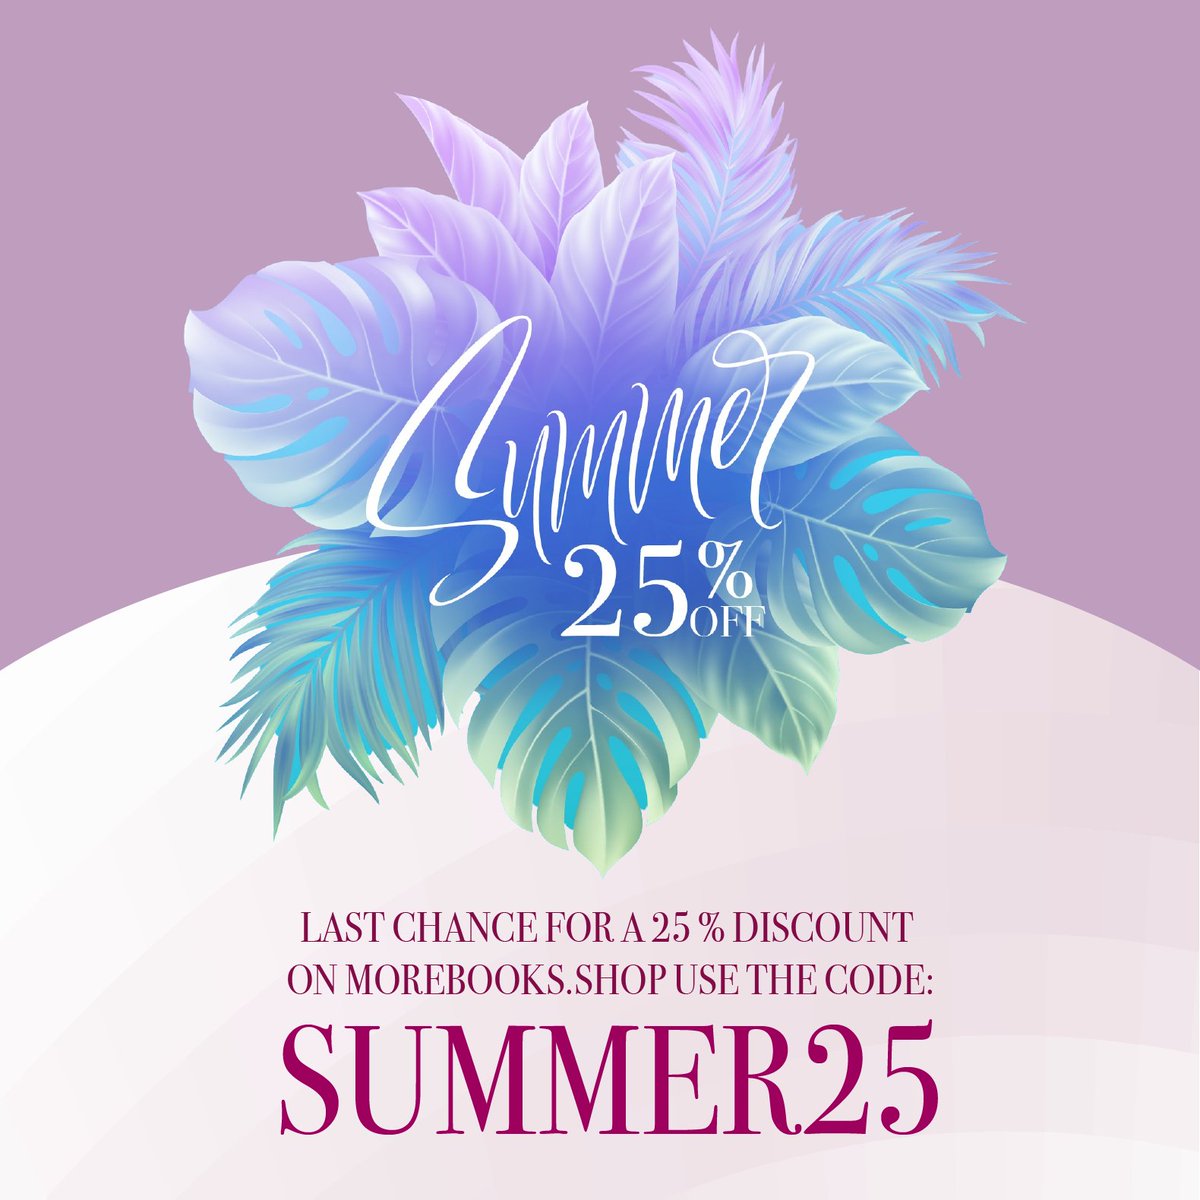 📢 Last chance for a 25% on 🌐 morebooks.shop ❗ Use the code SUMMER25 Don't miss this opportunity, enjoy your ☀️ summer! #summer #discounts #buybooks #readbooks 🕐 Hurry up, the offer expires on 12th July at 23:59 EEST